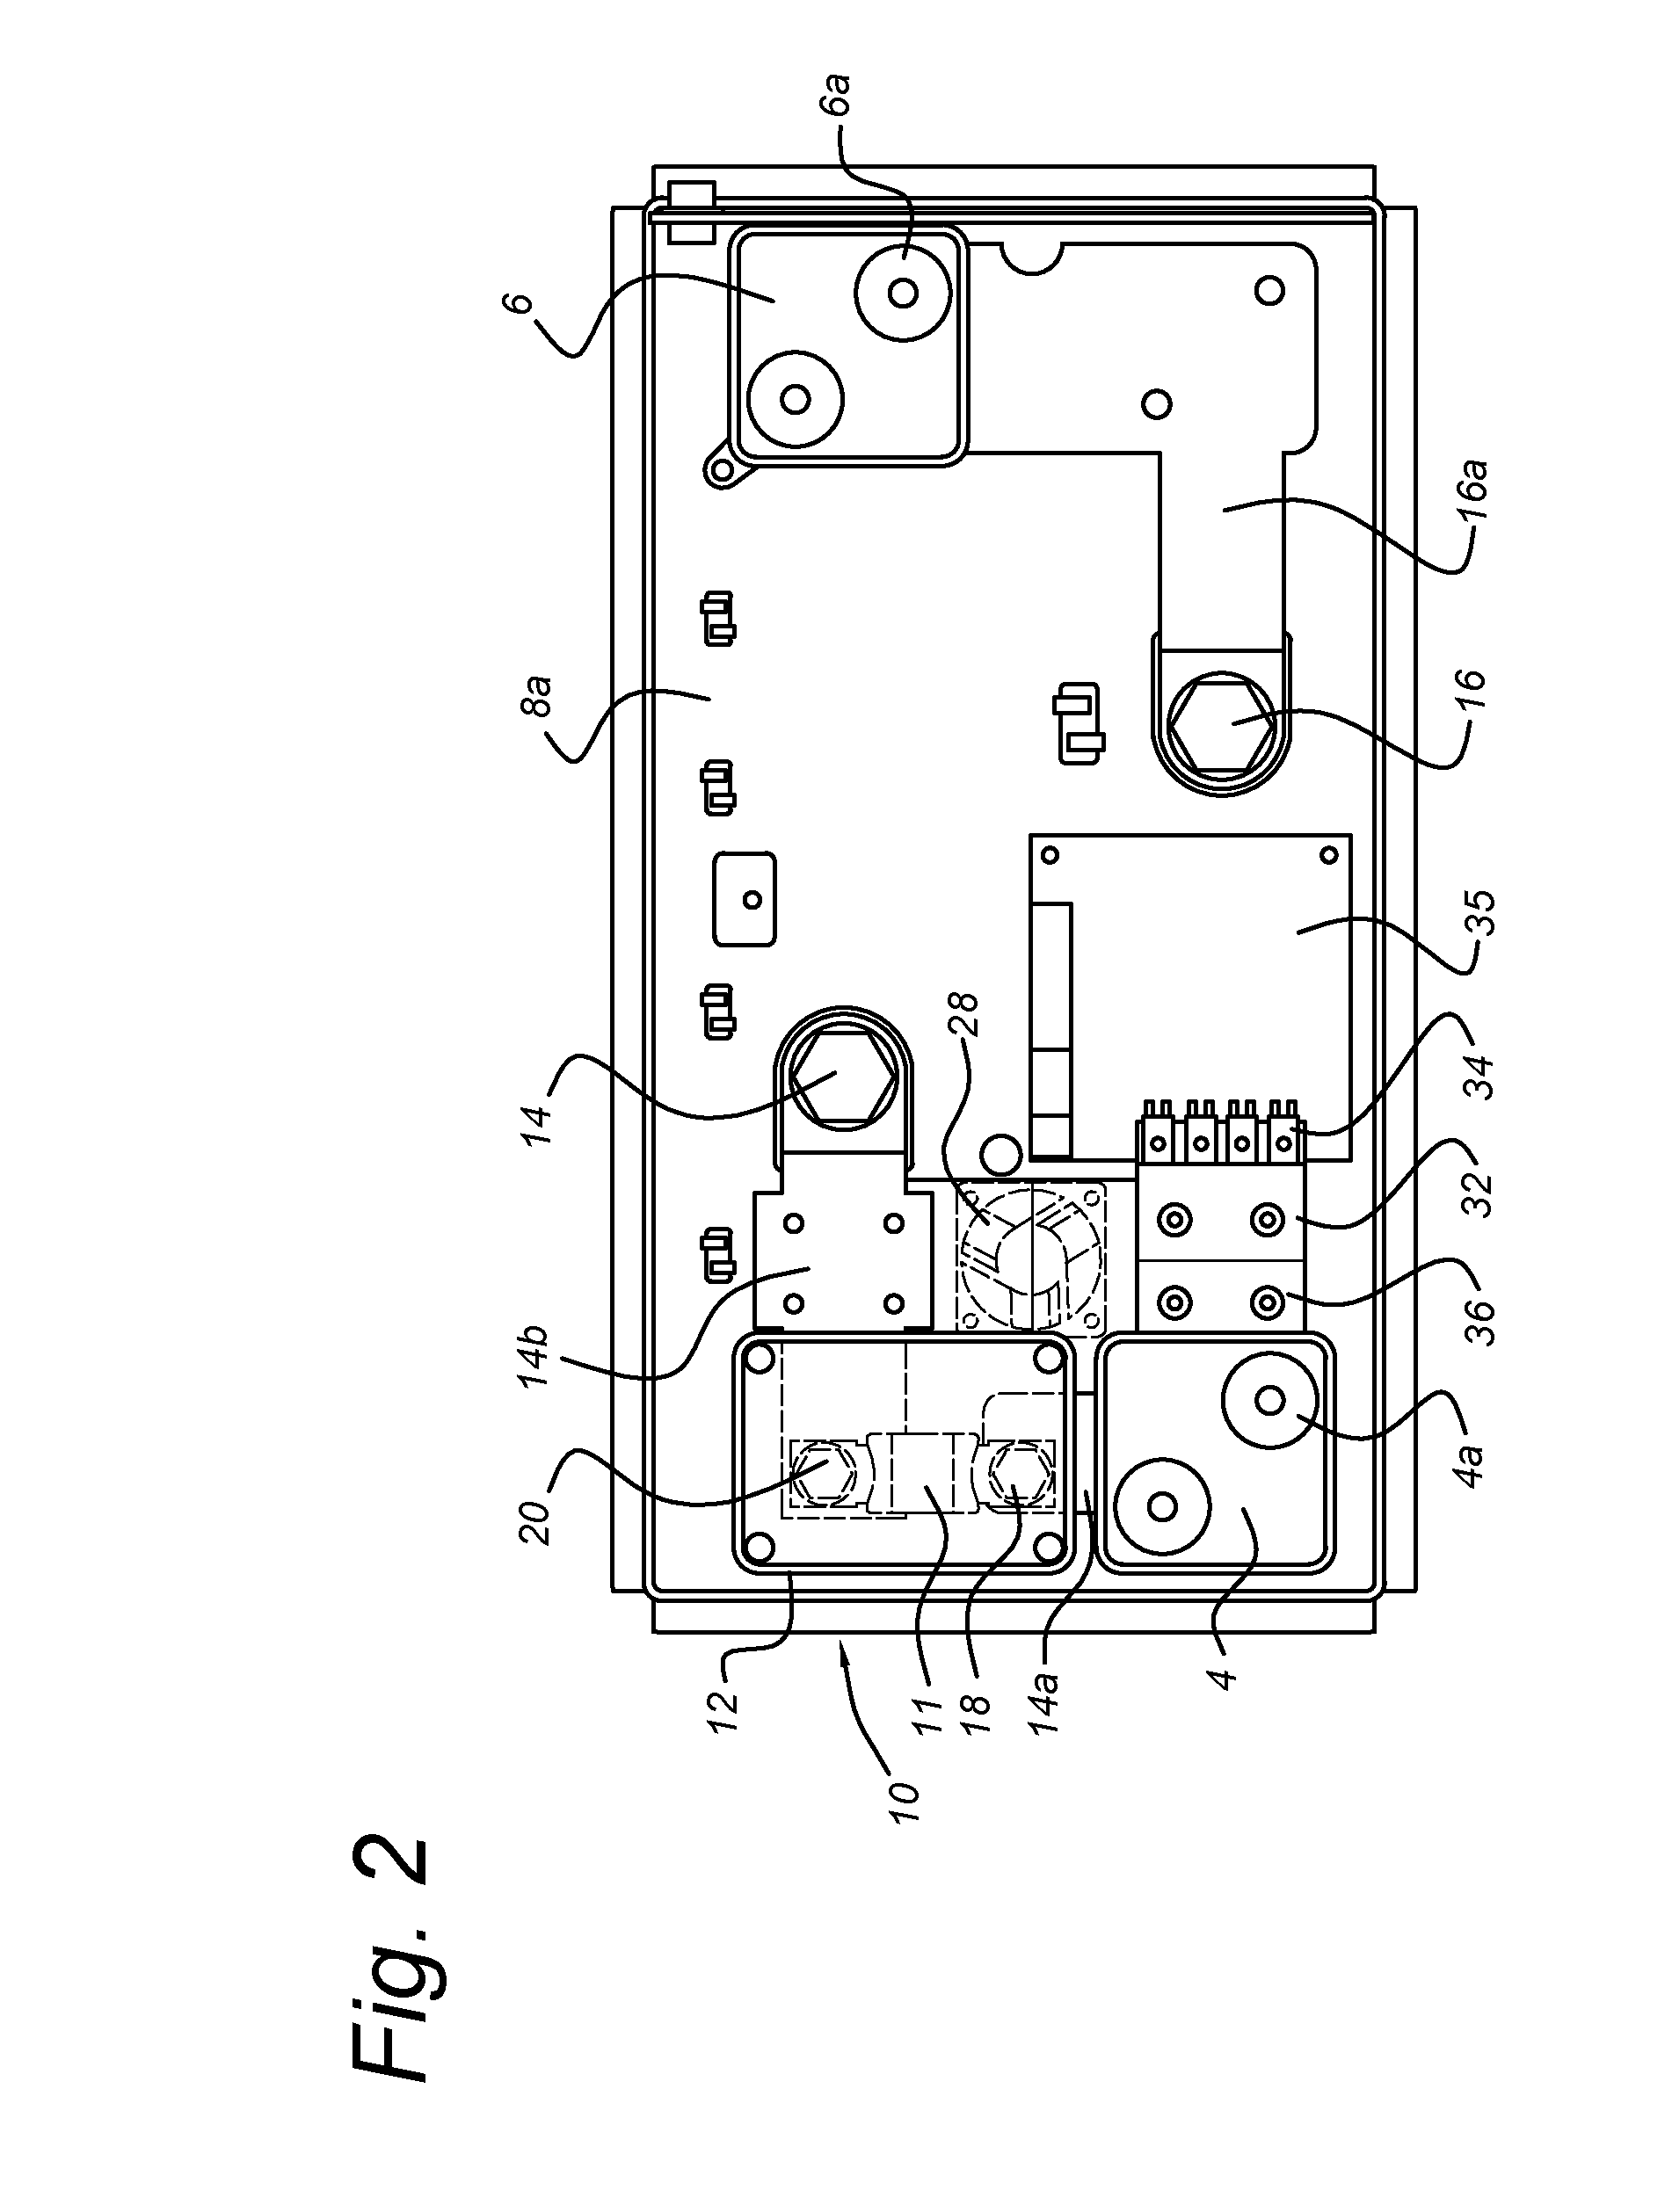 Battery with integrated fuse